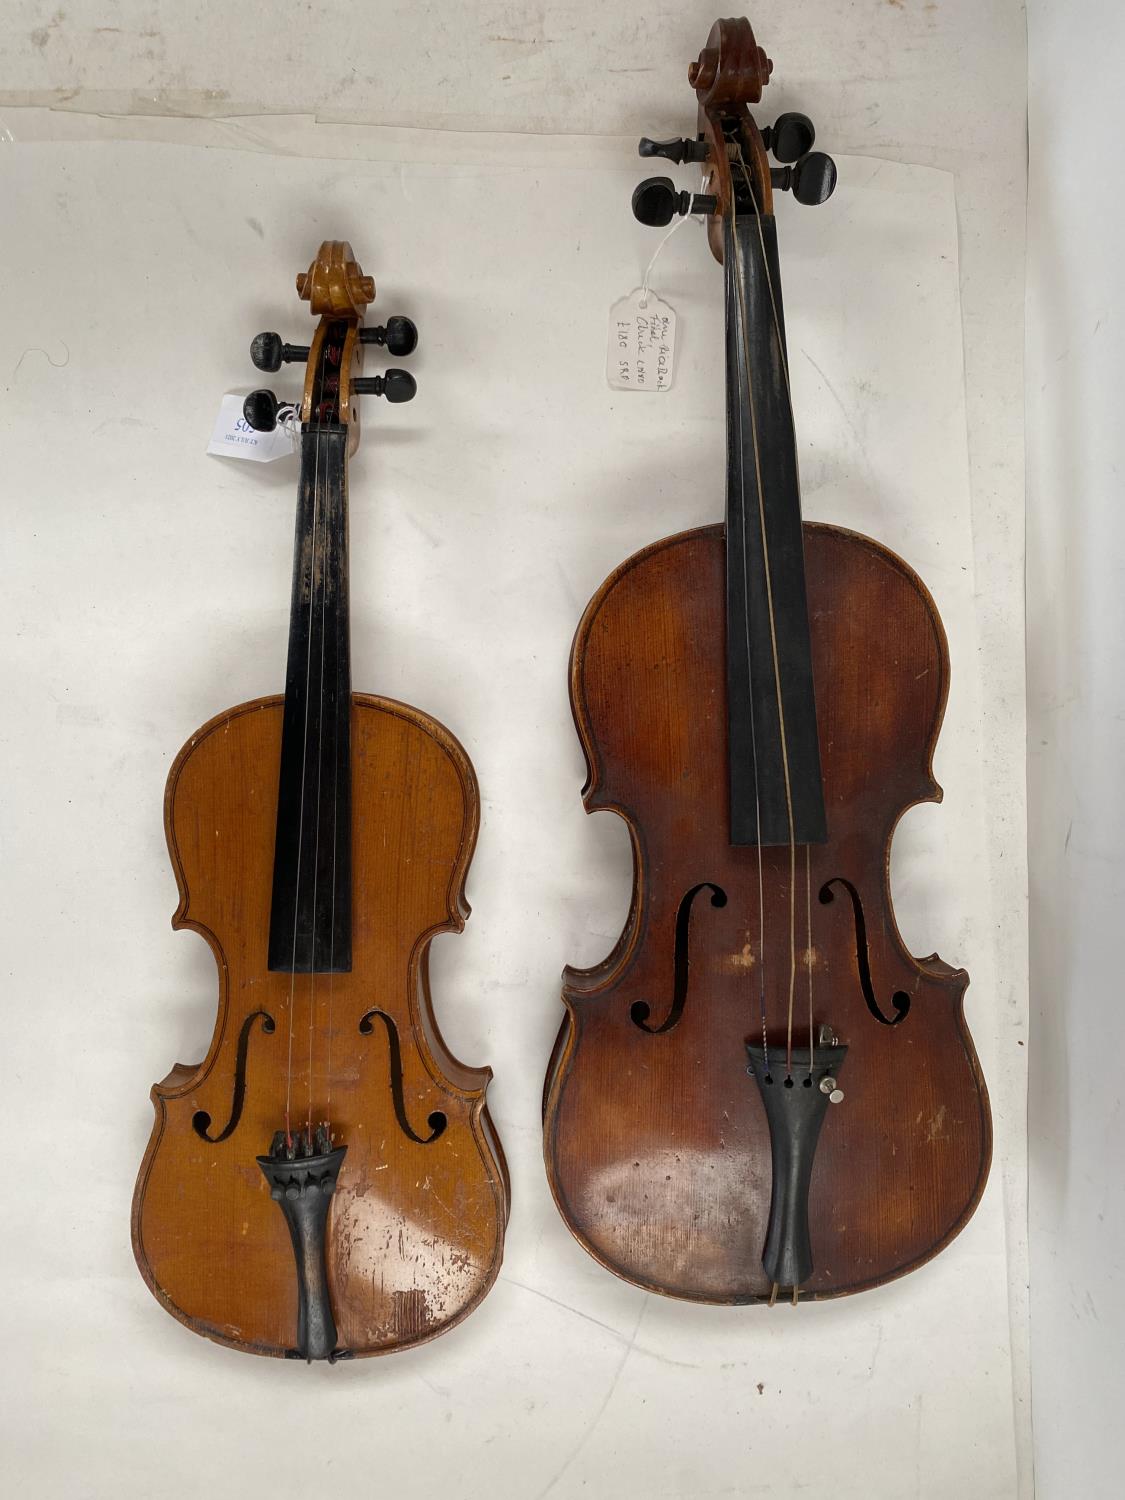 Two violins, both in need of restoration, see images for details and condition